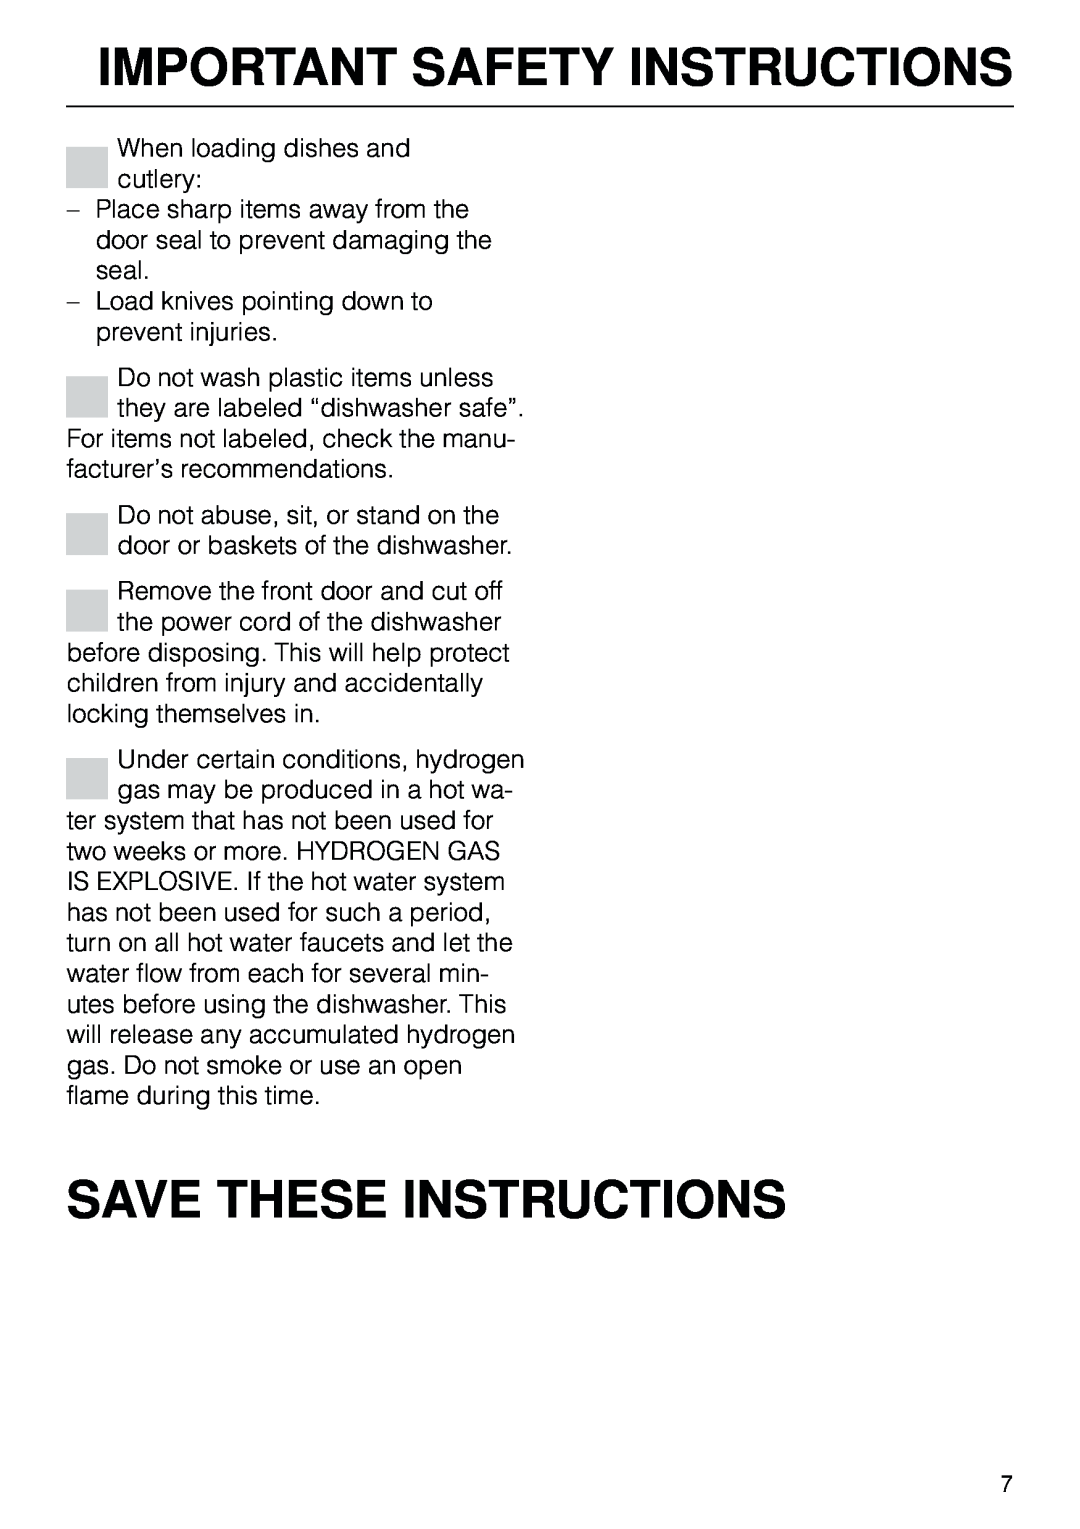 Miele G 803 manual Save These Instructions, Important Safety Instructions, When loading dishes and cutlery 